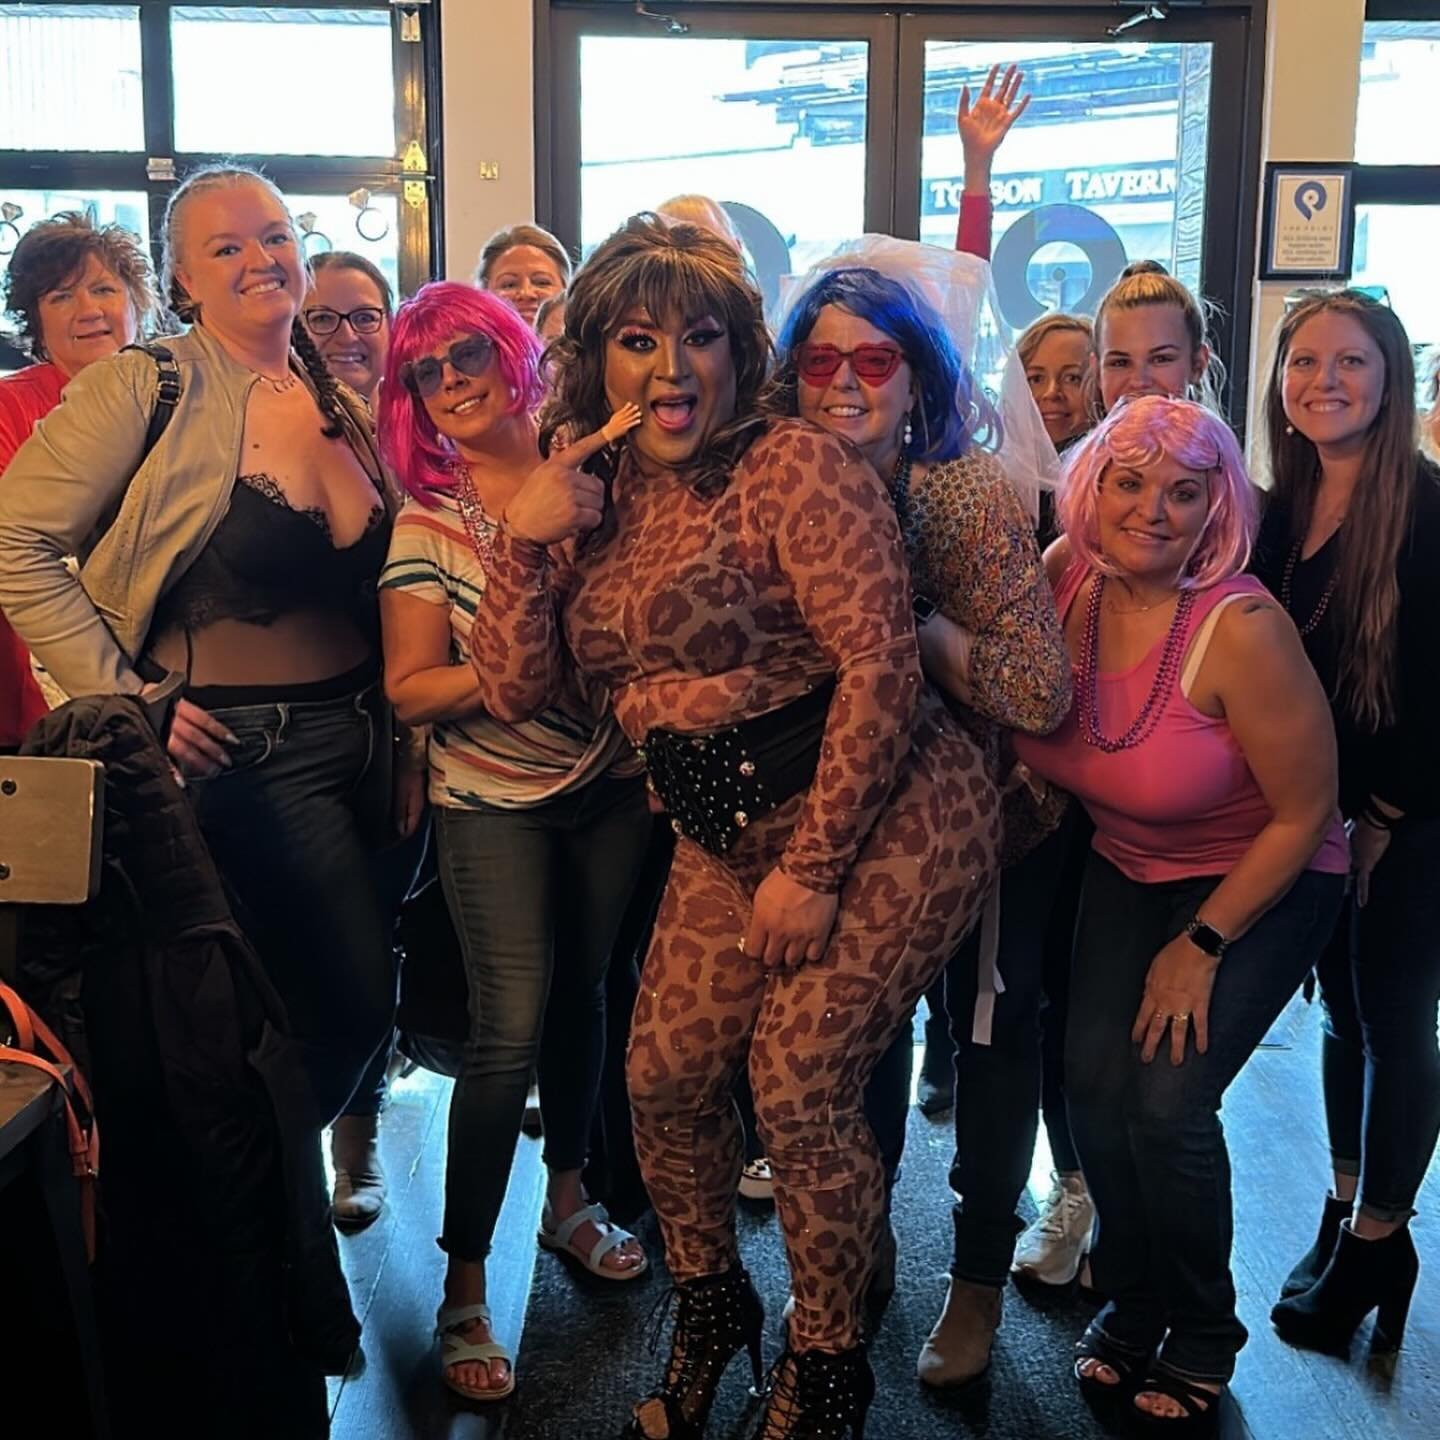 💖✨DRAG BRUNCH GIVEAWAY TIME ✨💖

We are giving away 4 BAR SEATS for our upcoming Drag Brunch on Saturday April 27th 10-2 pm!

To enter for a chance to win, all you have to do is follow 3 easy steps below:

1. Like this post &amp; tag your 3 friends 